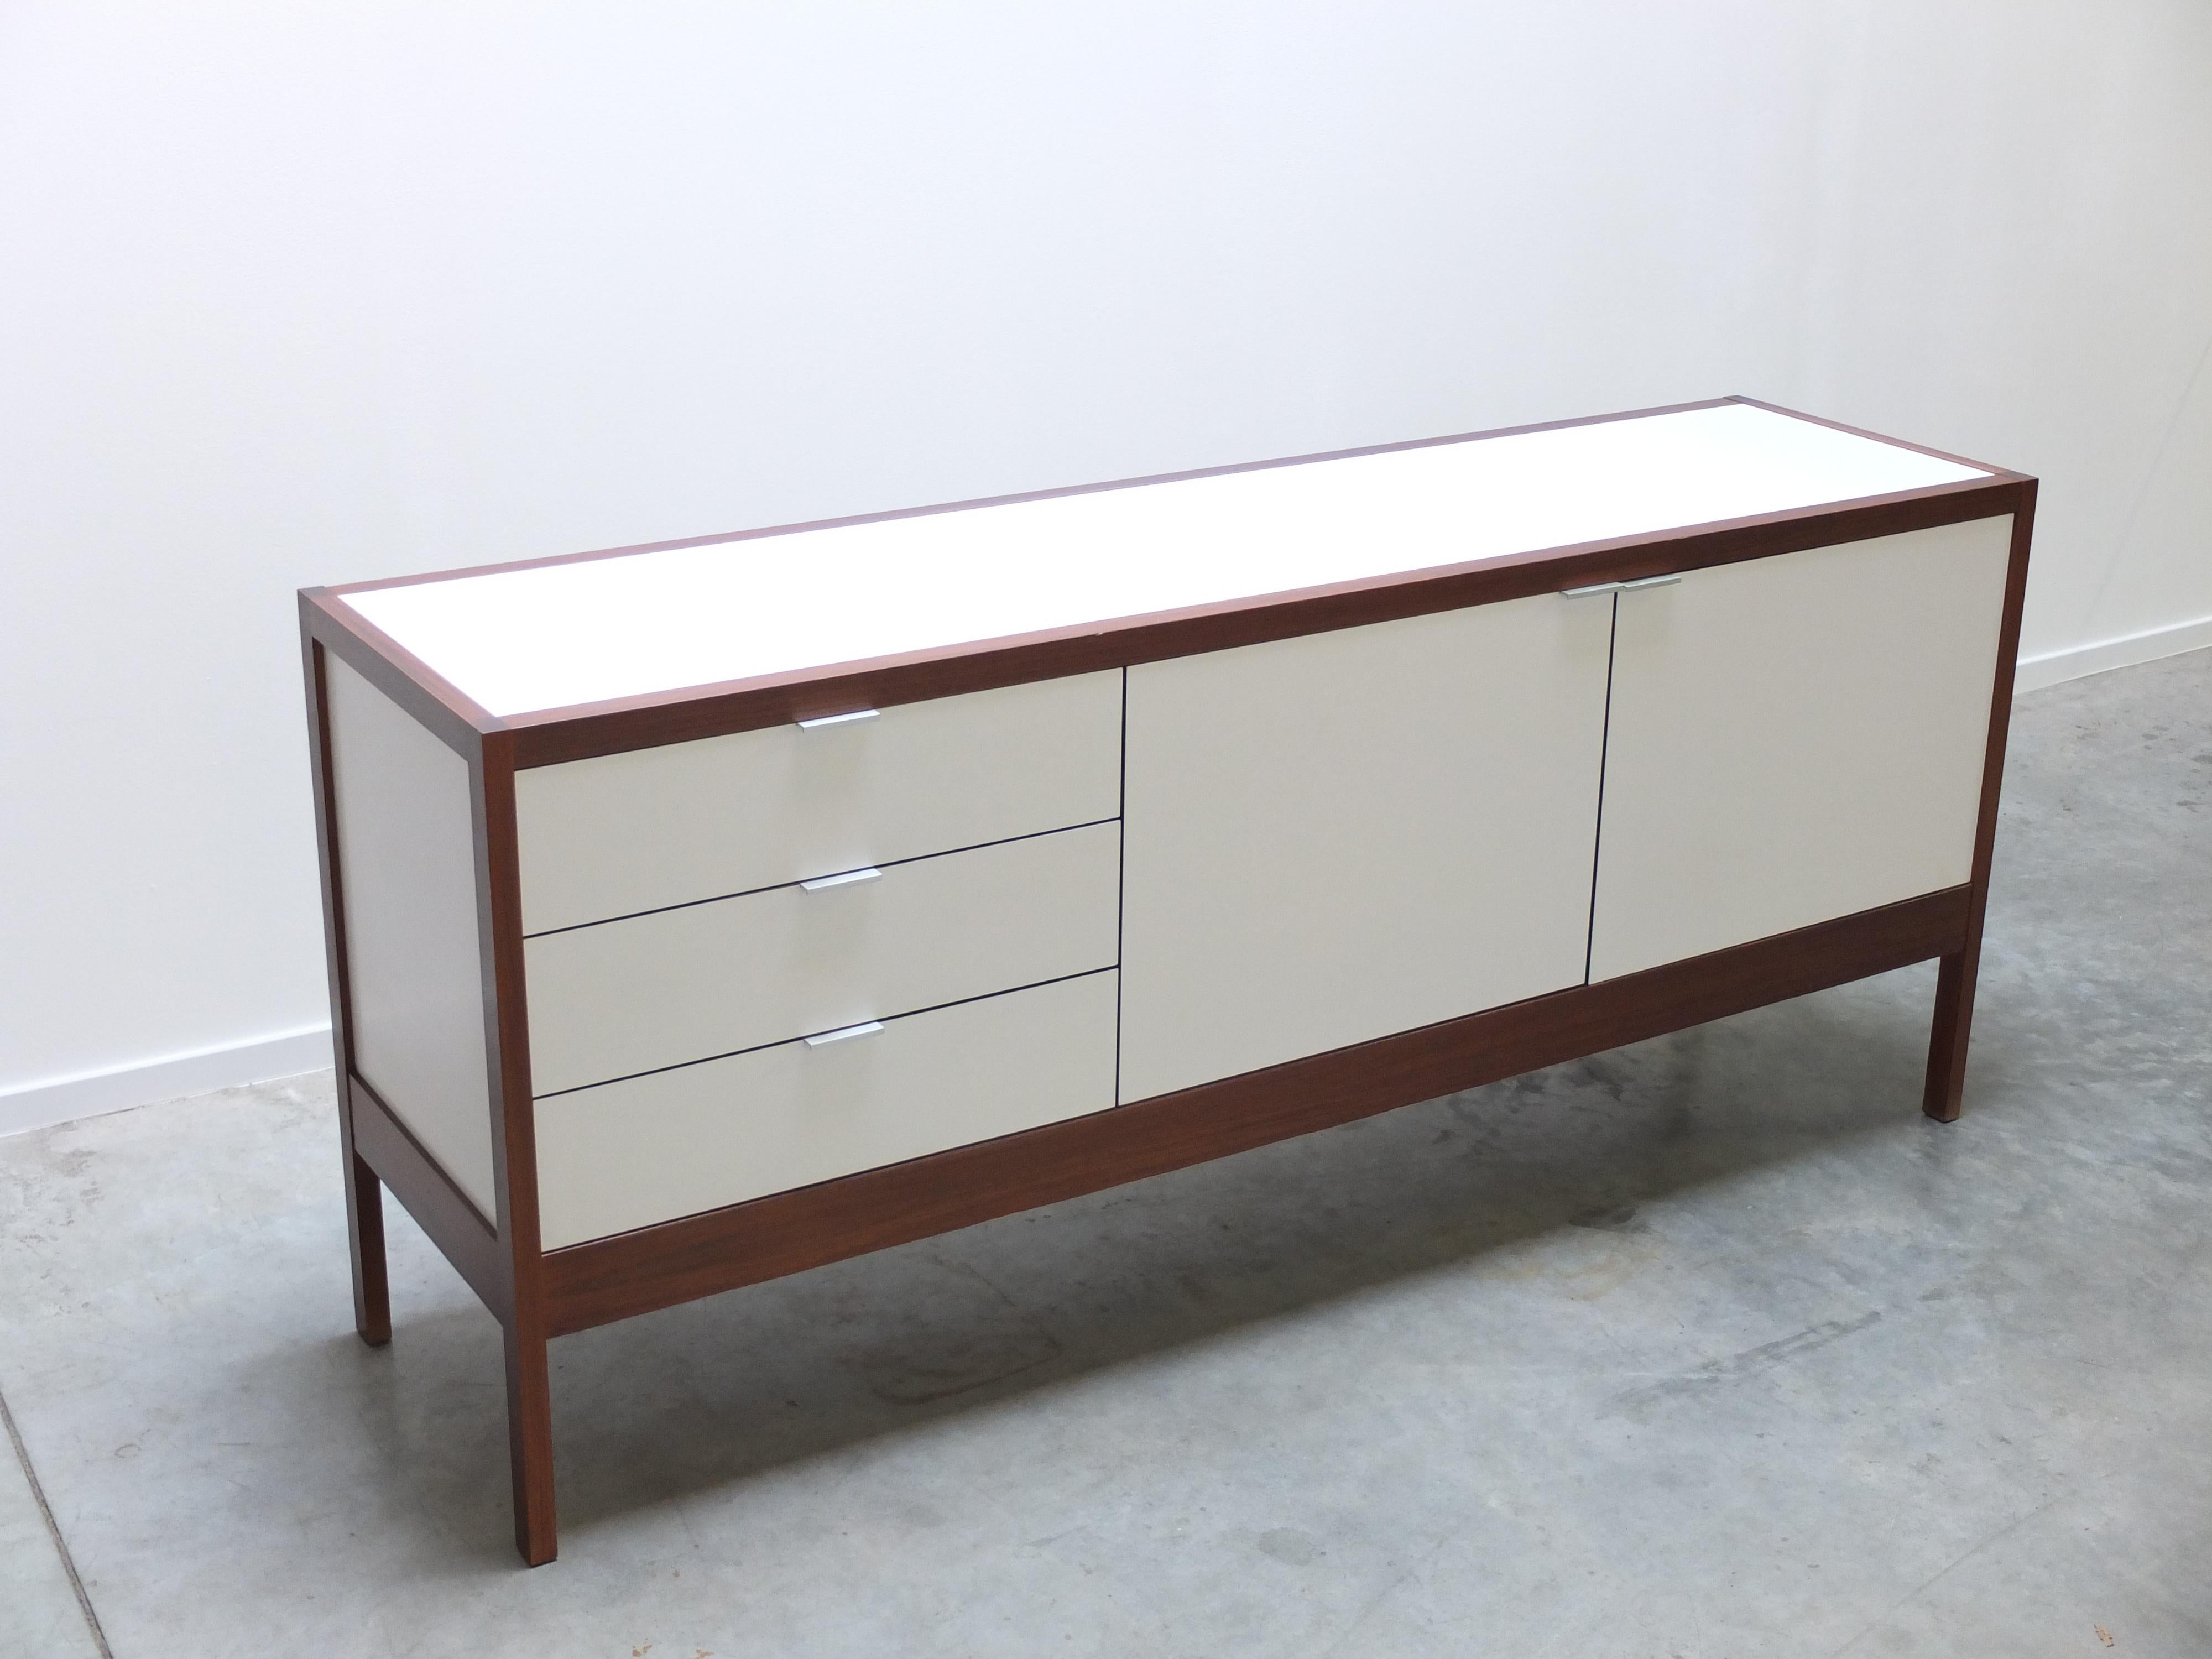 High End 'Series 3' Sideboard by Dieter Waeckerlin for Idealheim, 1960s For Sale 11